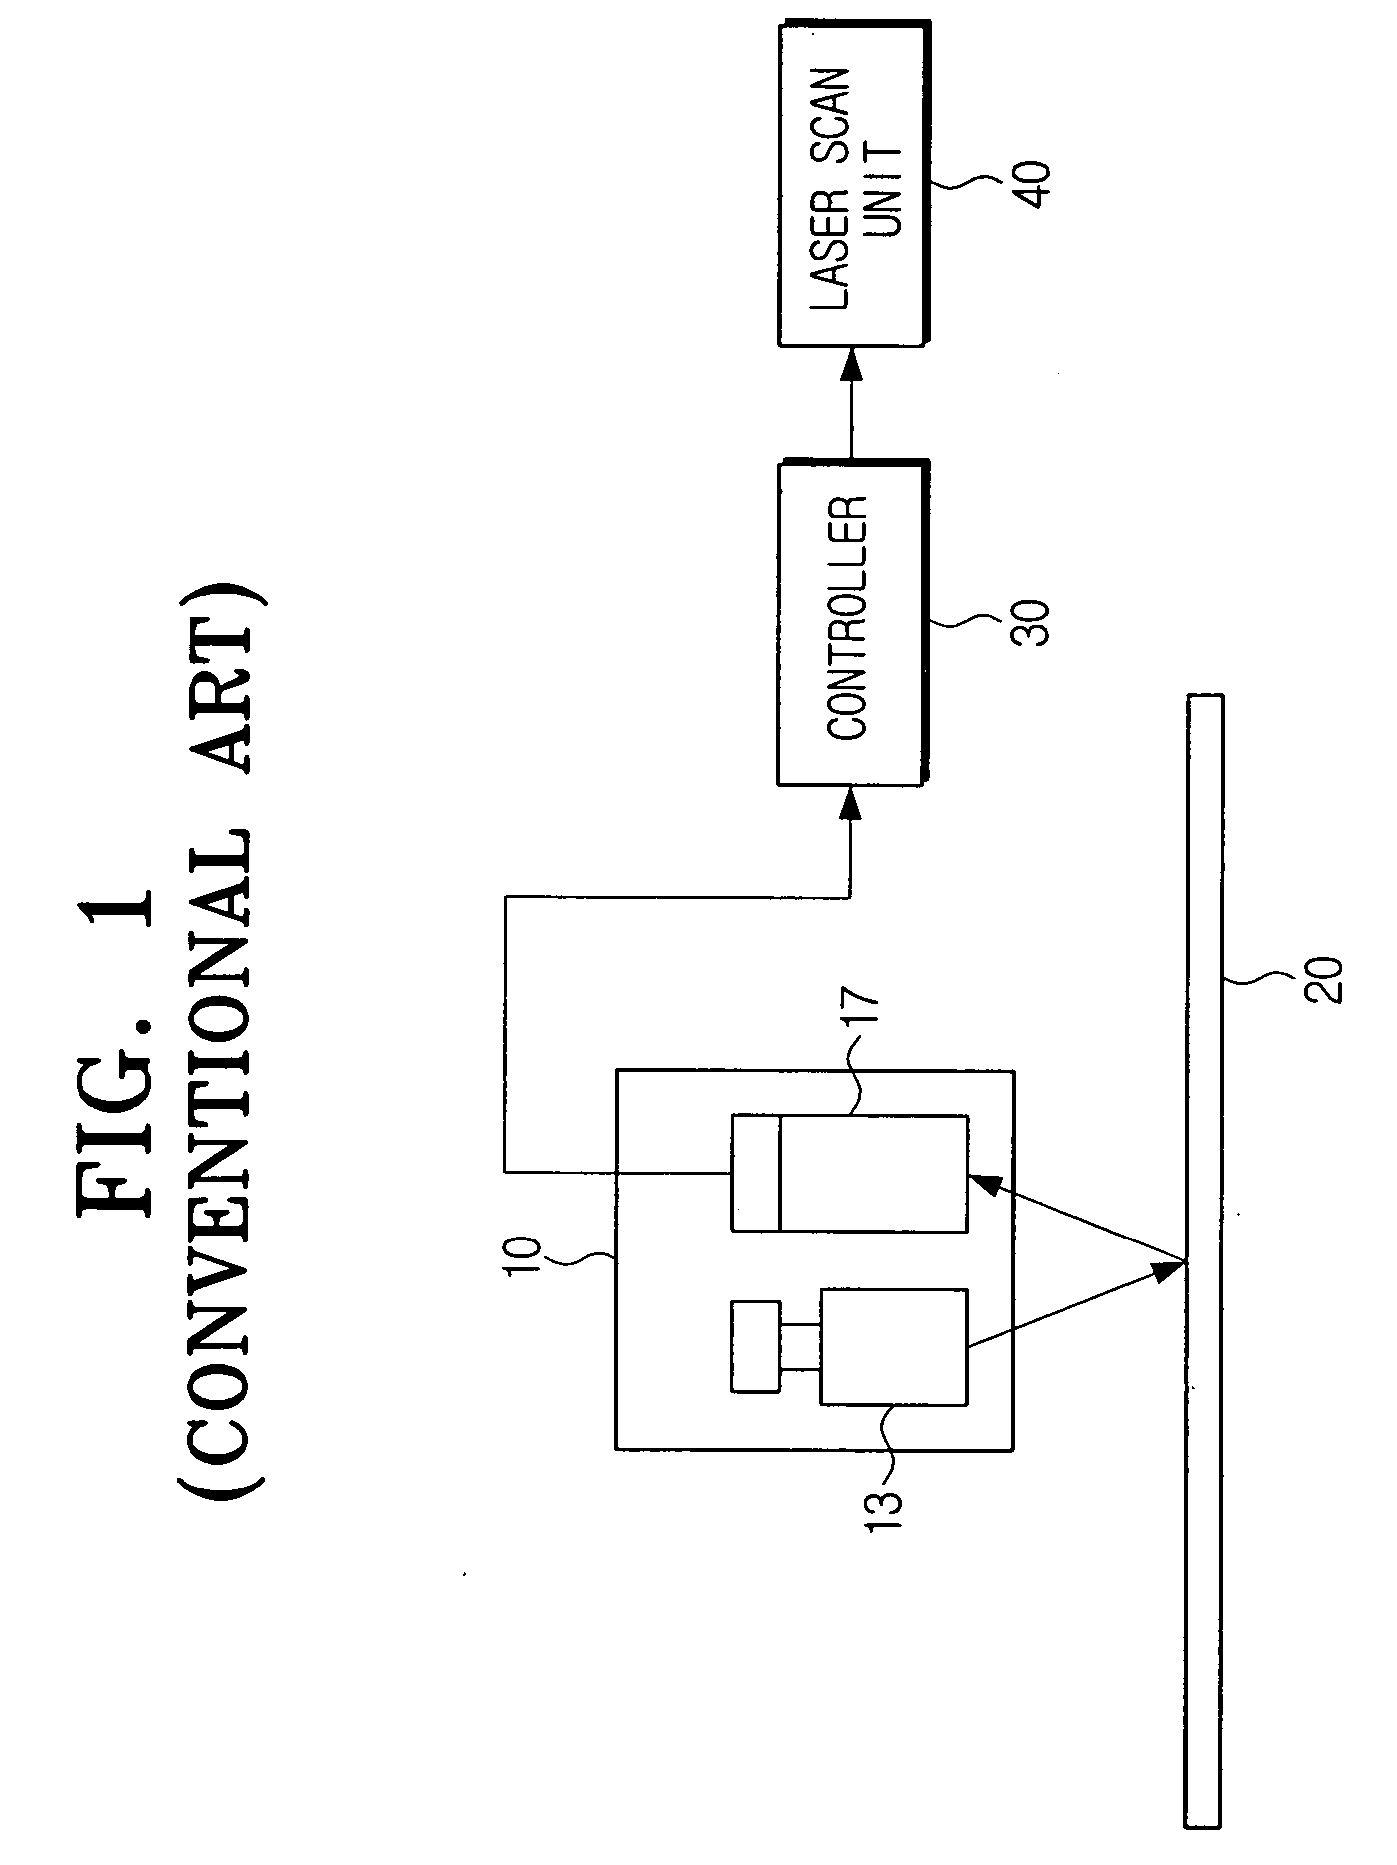 System and method for correcting color registration